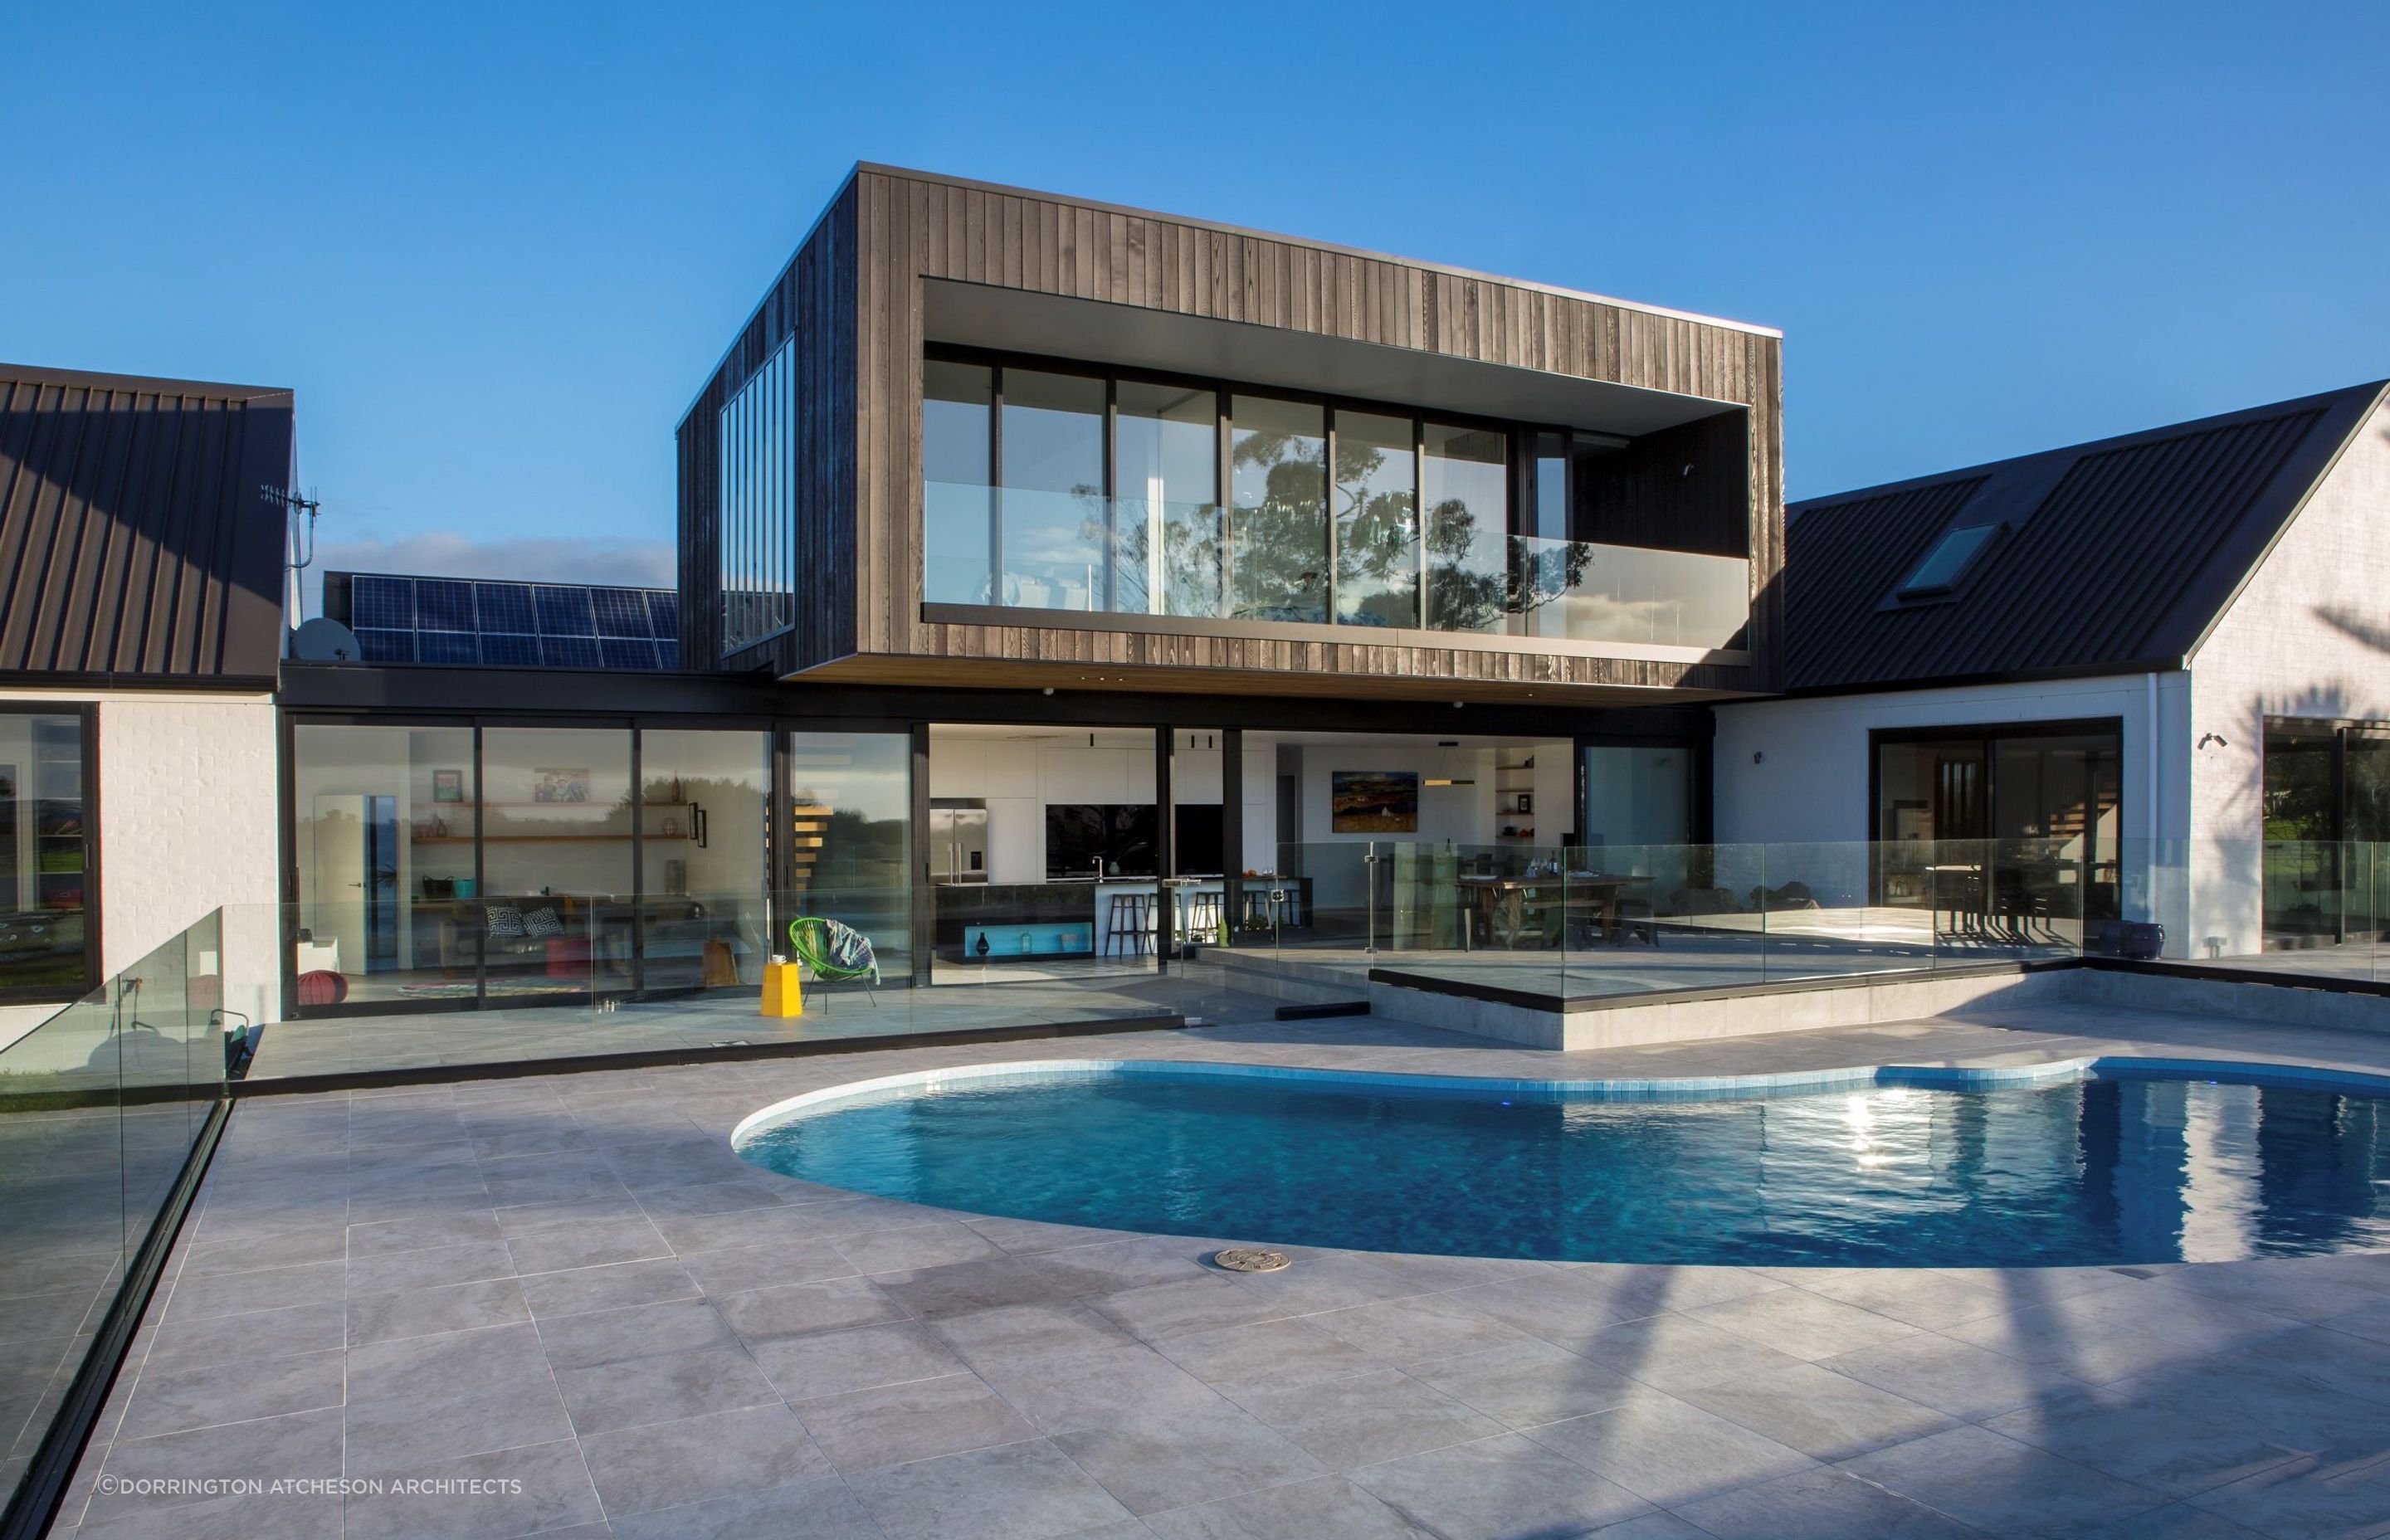 A modern take on a kidney-shaped pool in this stylish home in Whitford. | Photography: Emma-Jane Hetherington